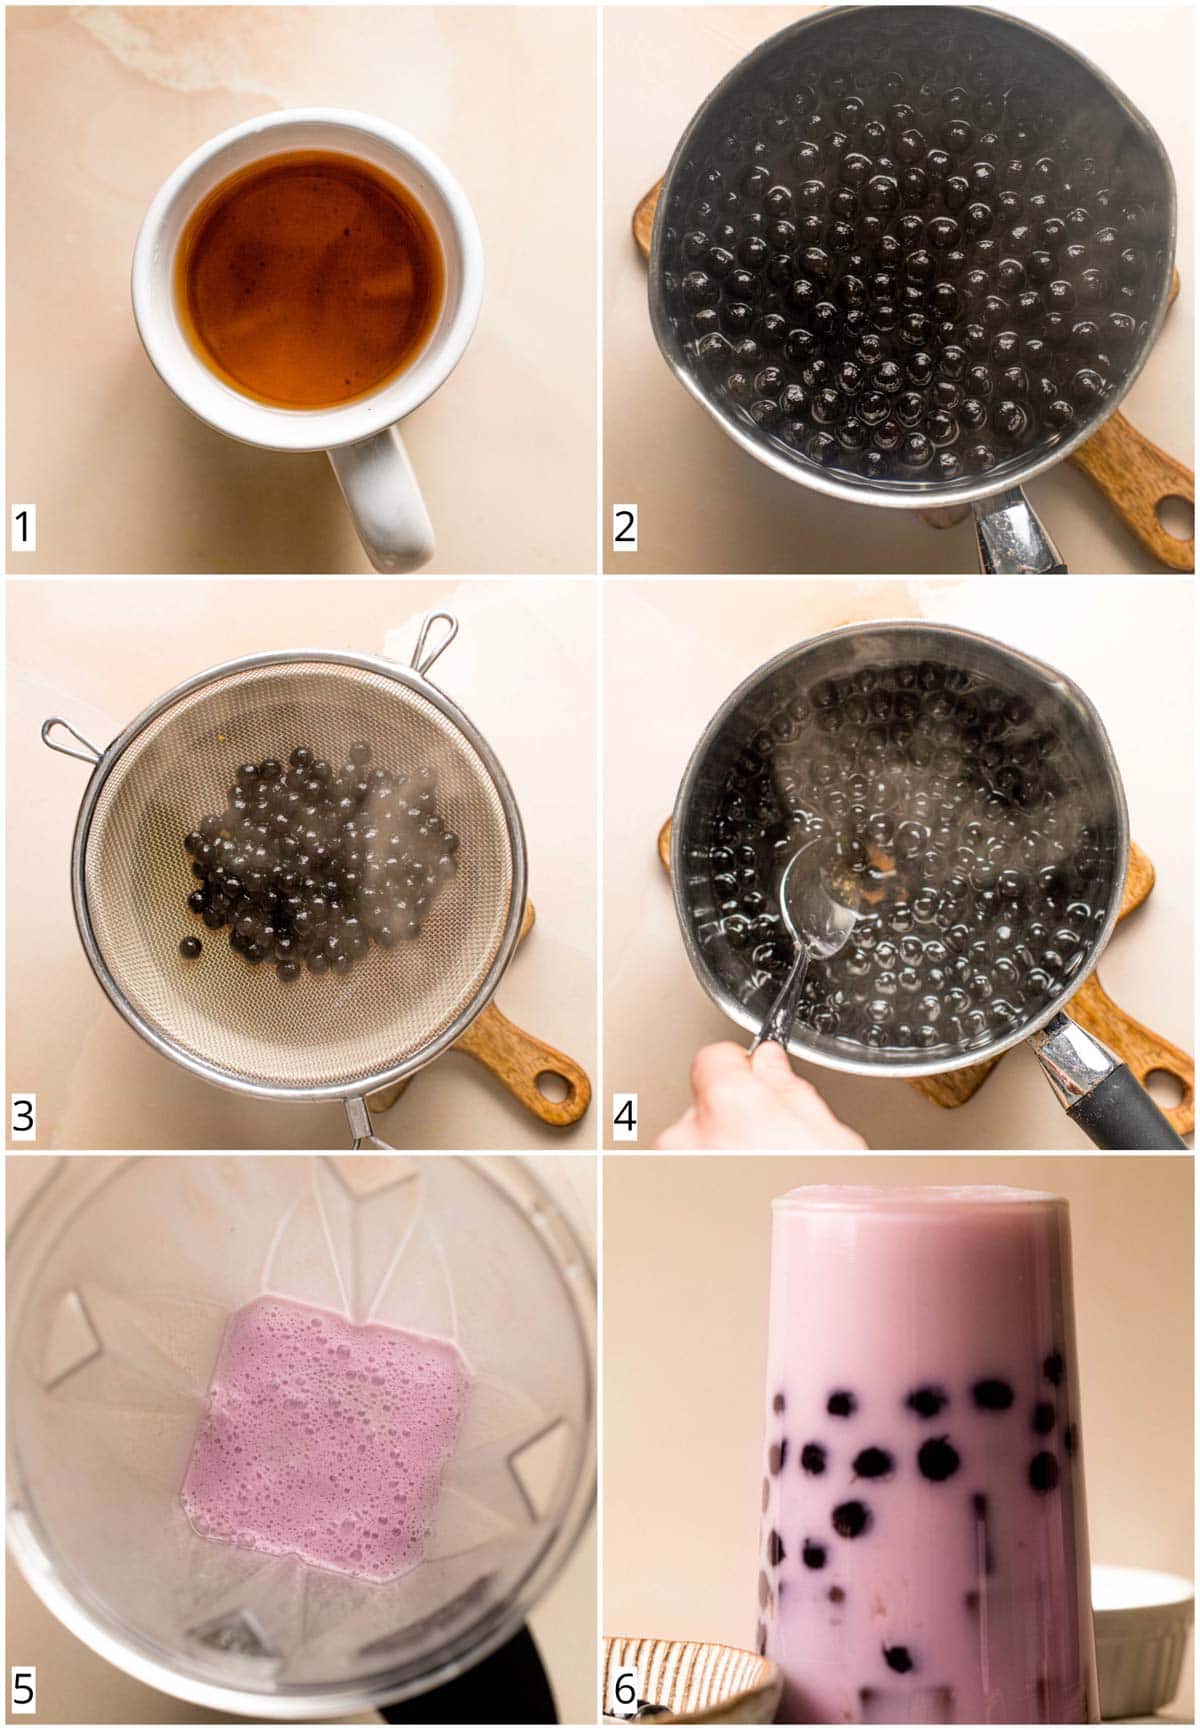 A collage of six photos showing all the steps in making taro milk tea.